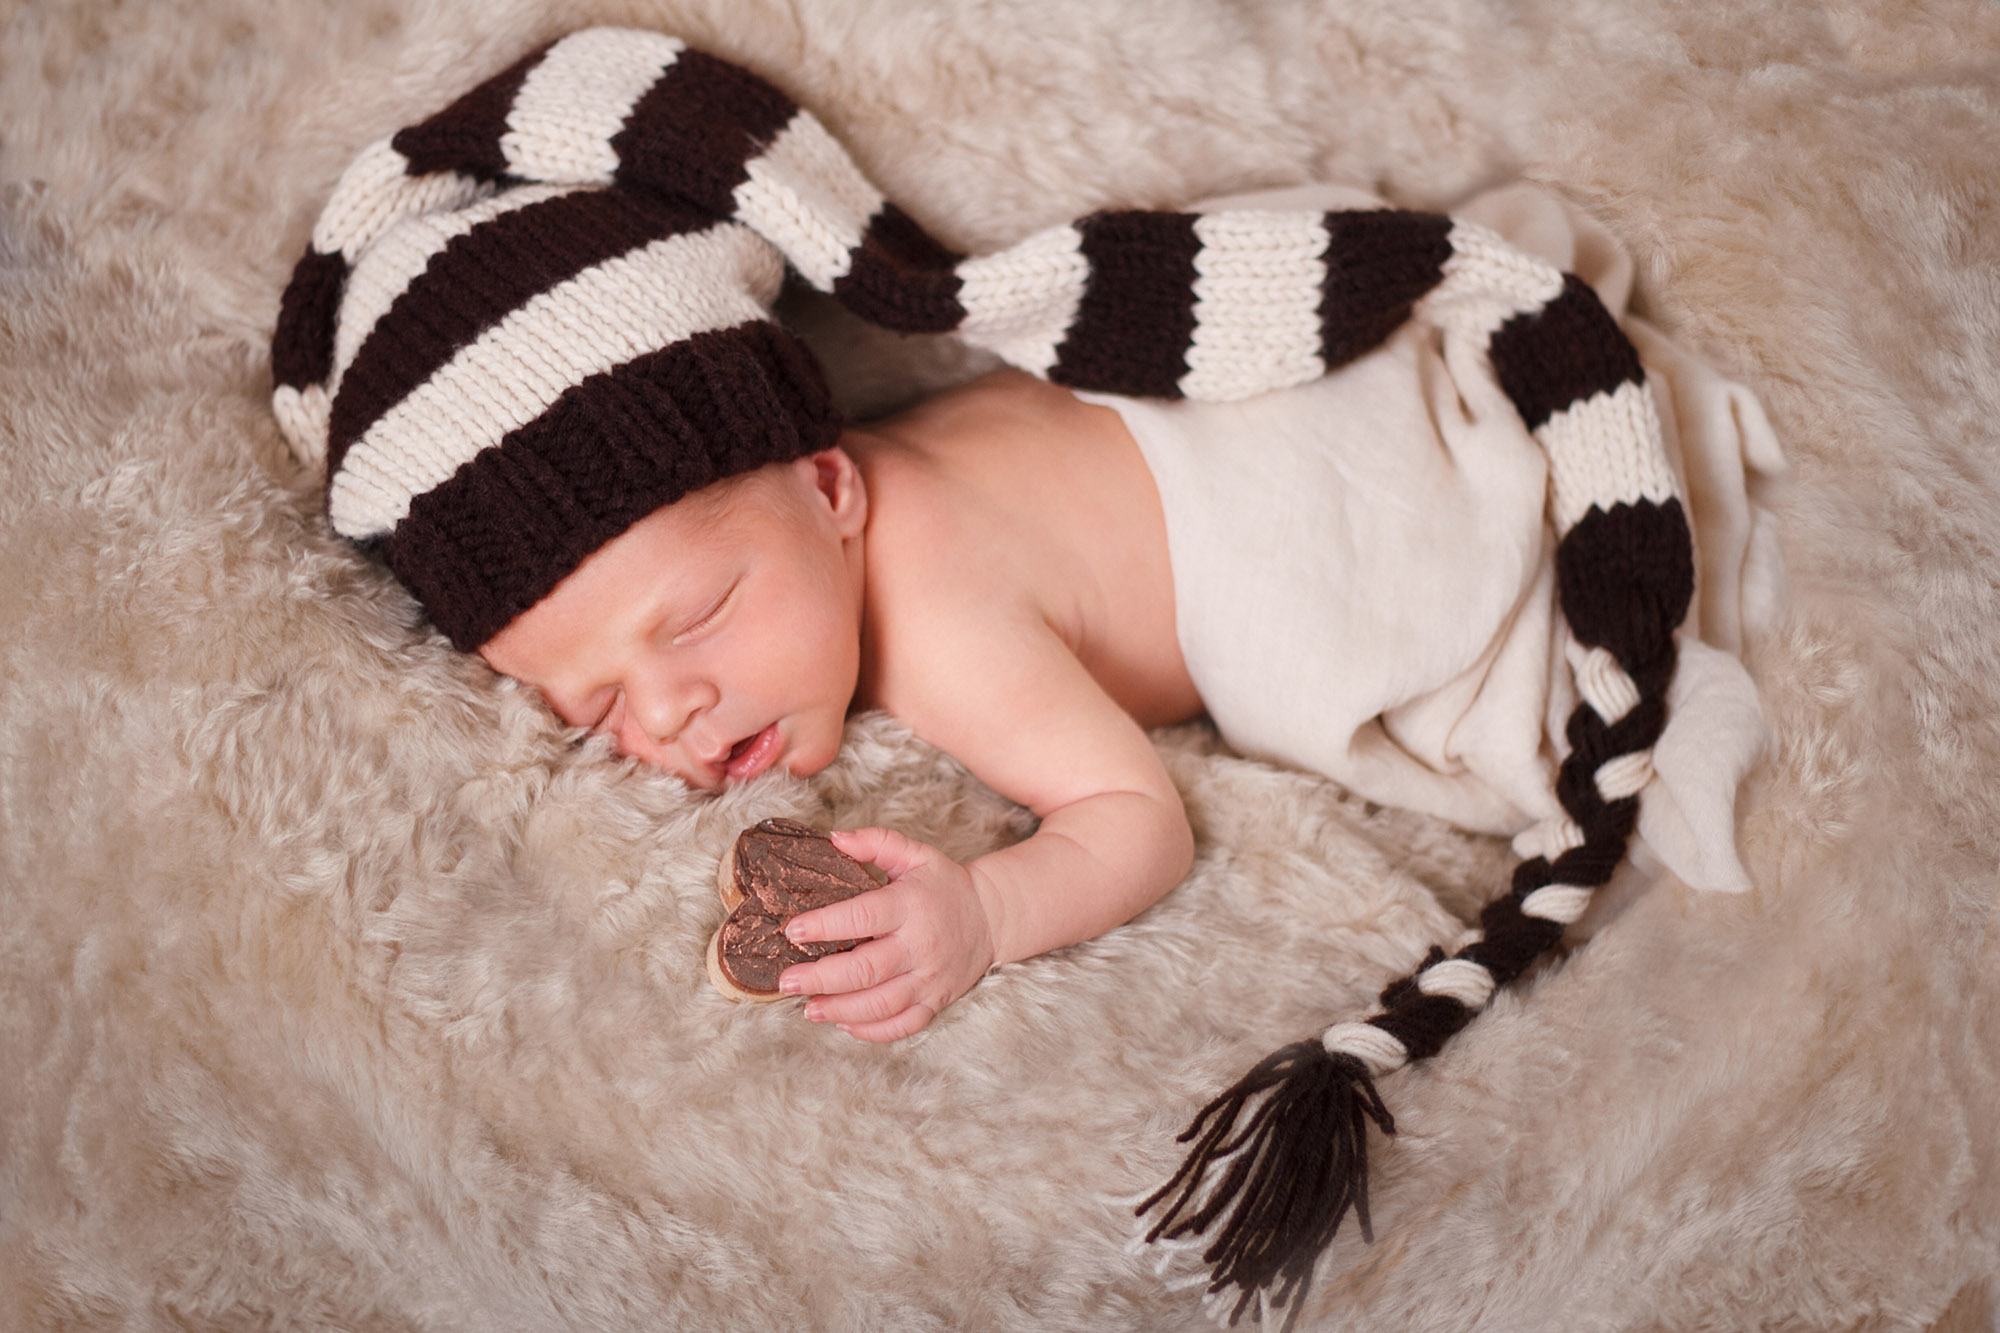 Sleeping infant holding a cookie on a fur